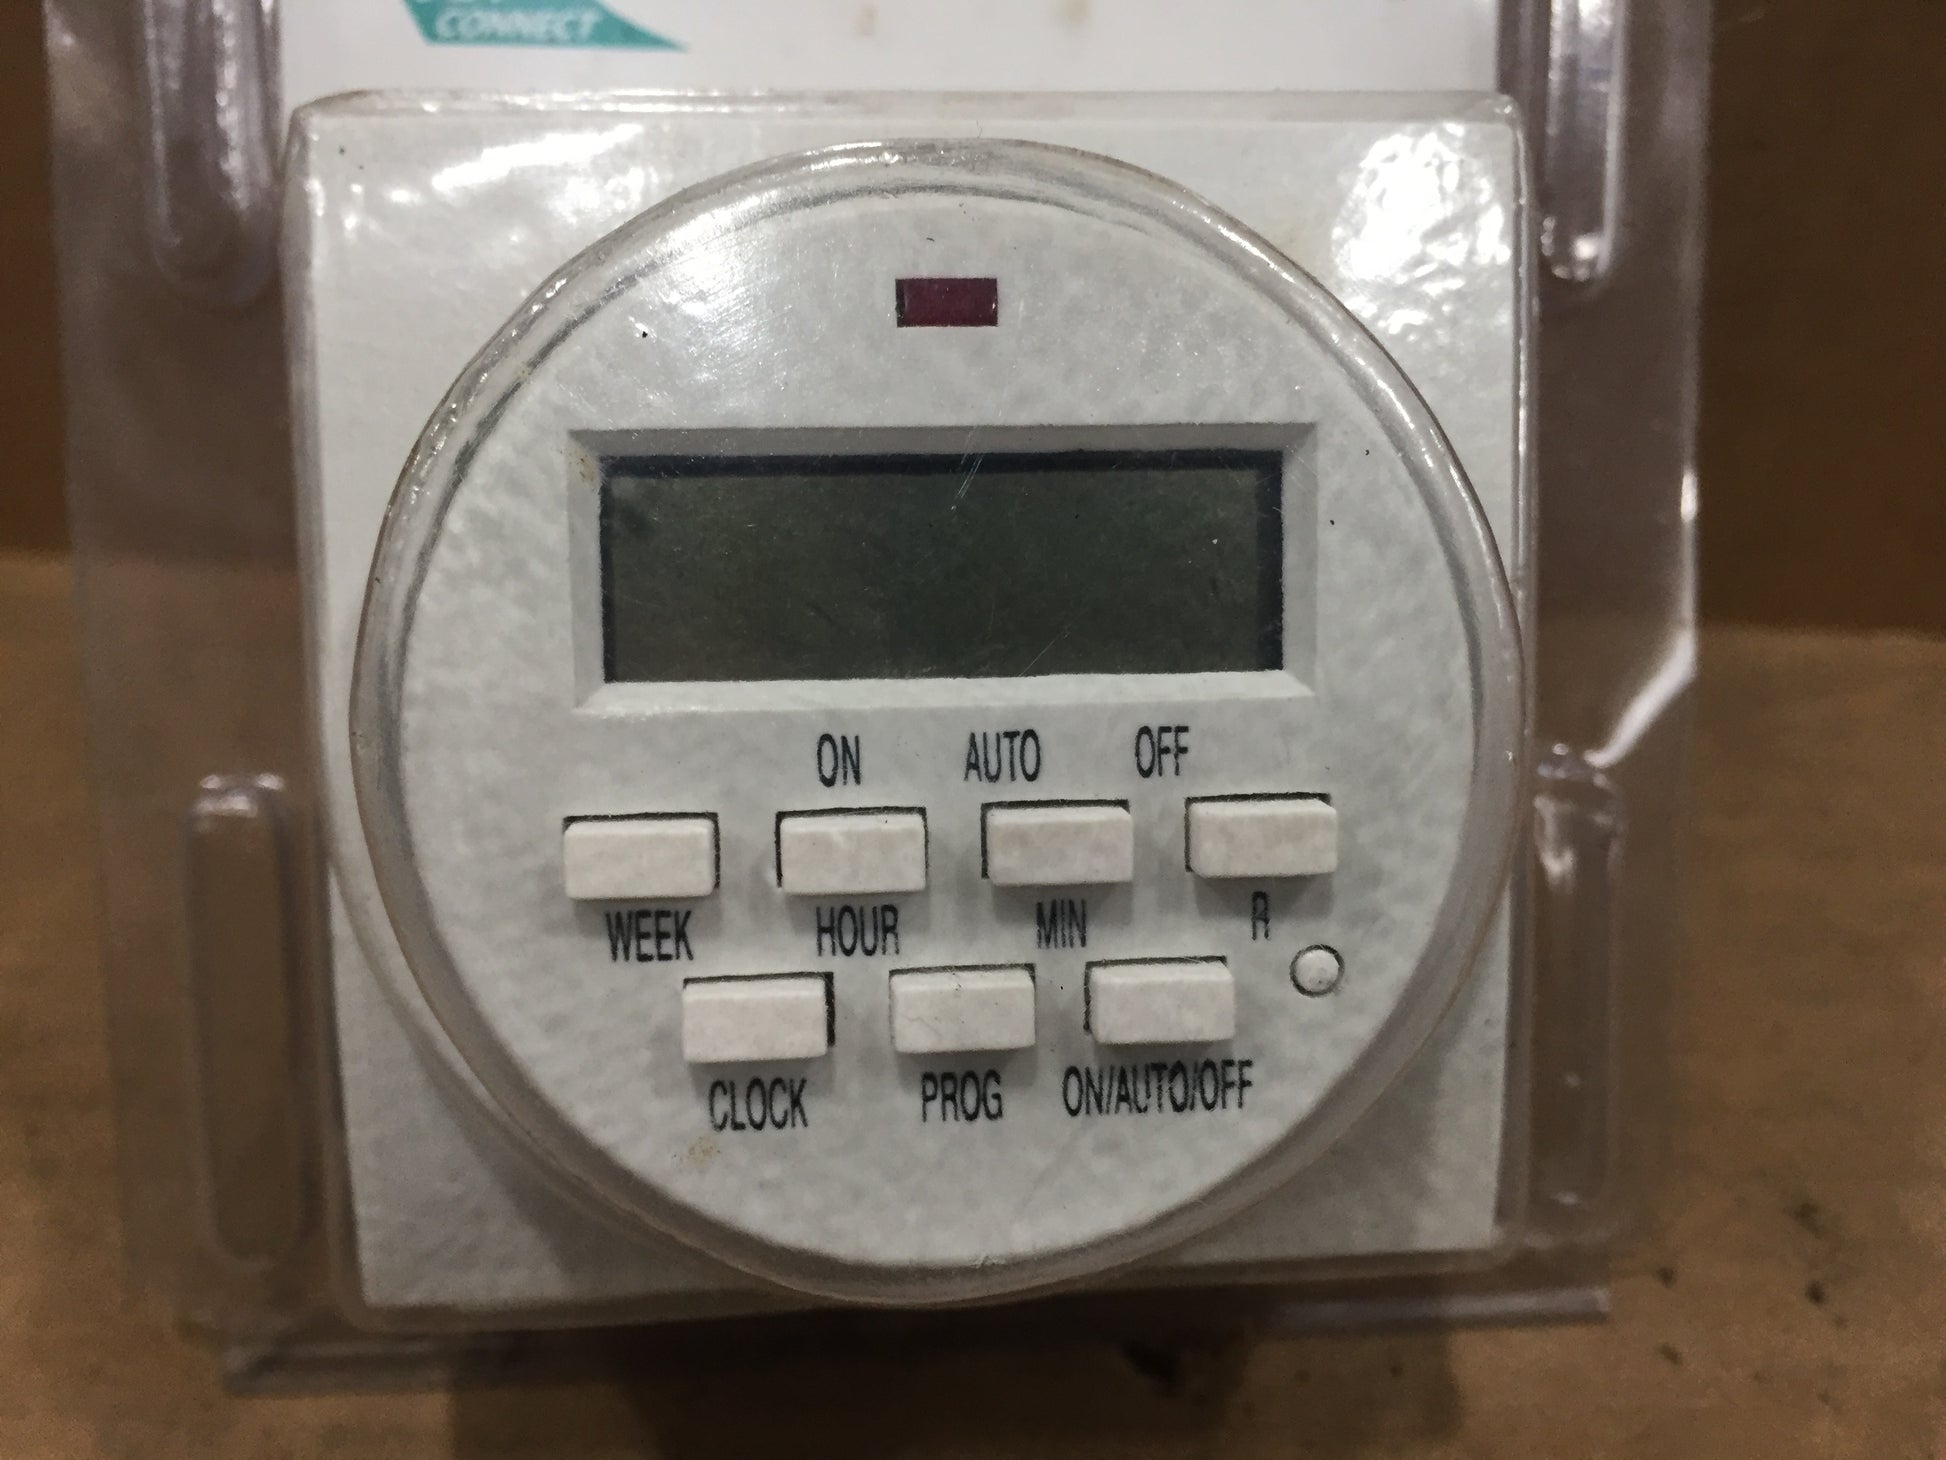 PROGRAMMABLE WEEKLY DIGITAL TIMER; 115V, 60HZ, 15A, 1725W